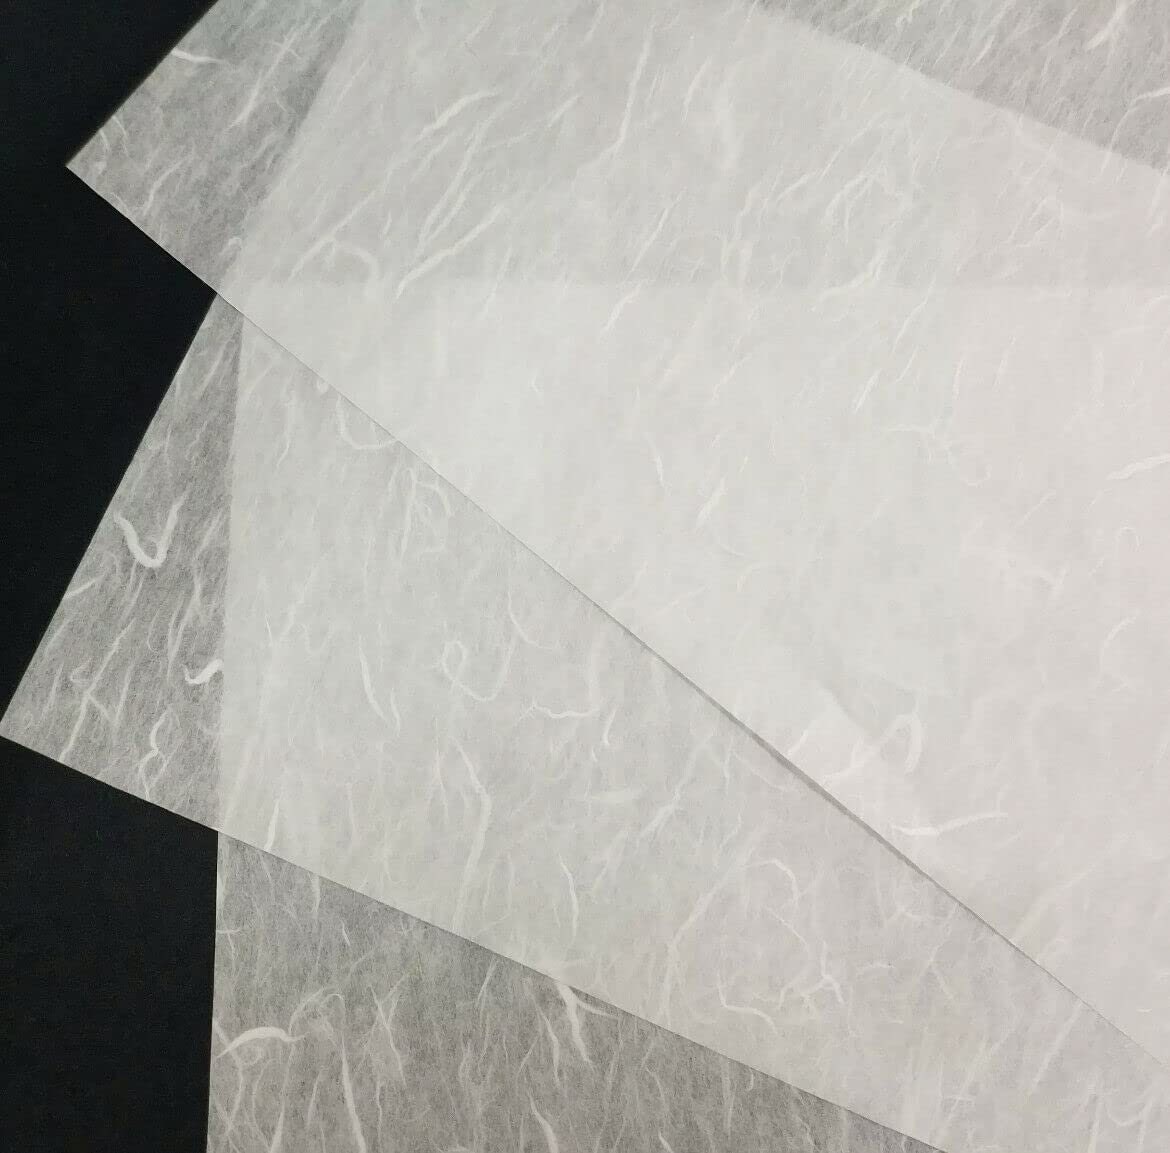 100x Edible Wafer Paper rice Paper for Printing A4 Pack 